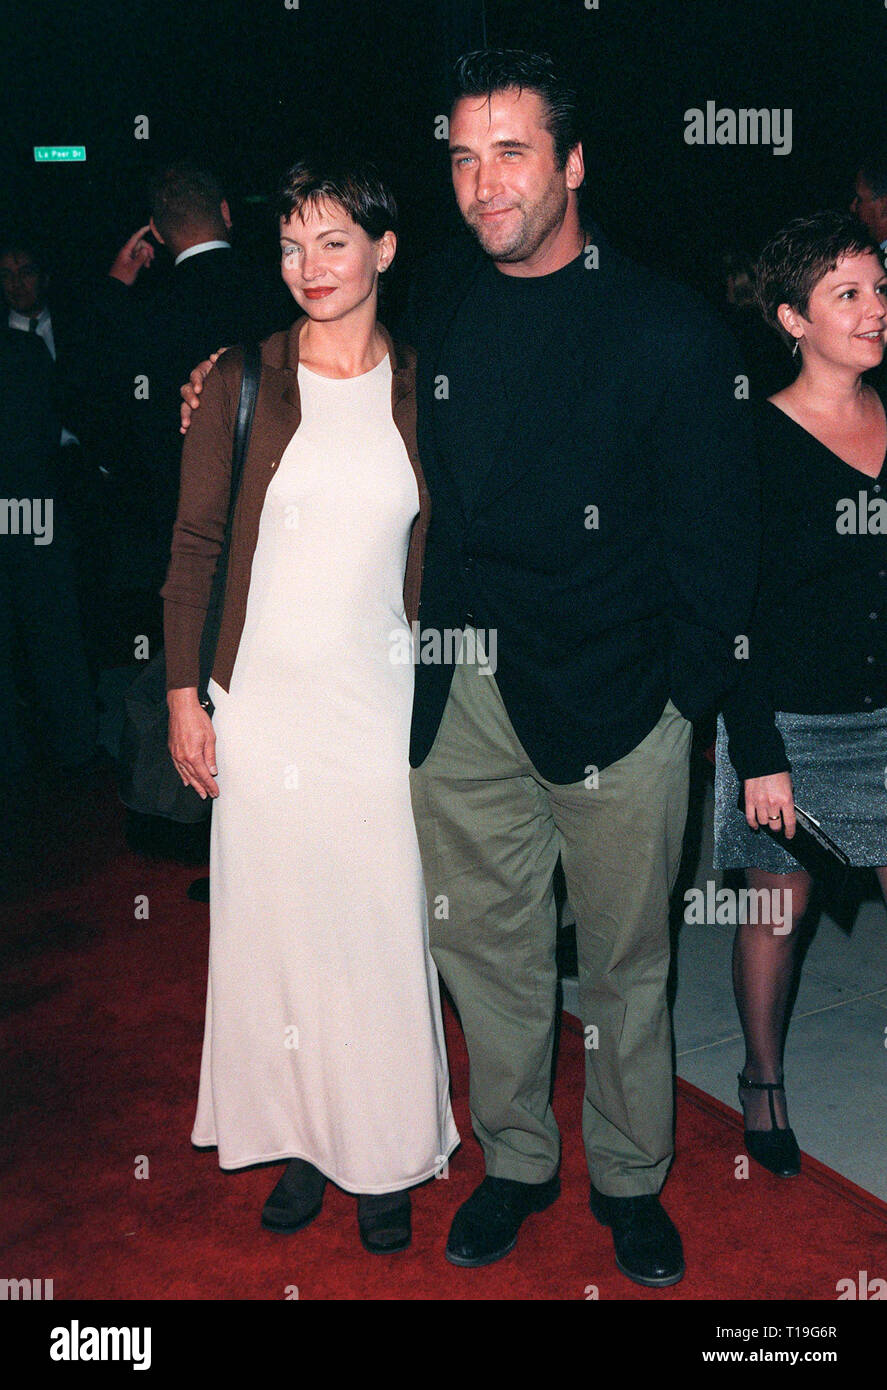 LOS ANGELES, CA - September 24, 1998:  Actor DANIEL BALDWIN & actress wife ISABELLA HOFFMAN at the US premiere of 'Ronin.' Stock Photo